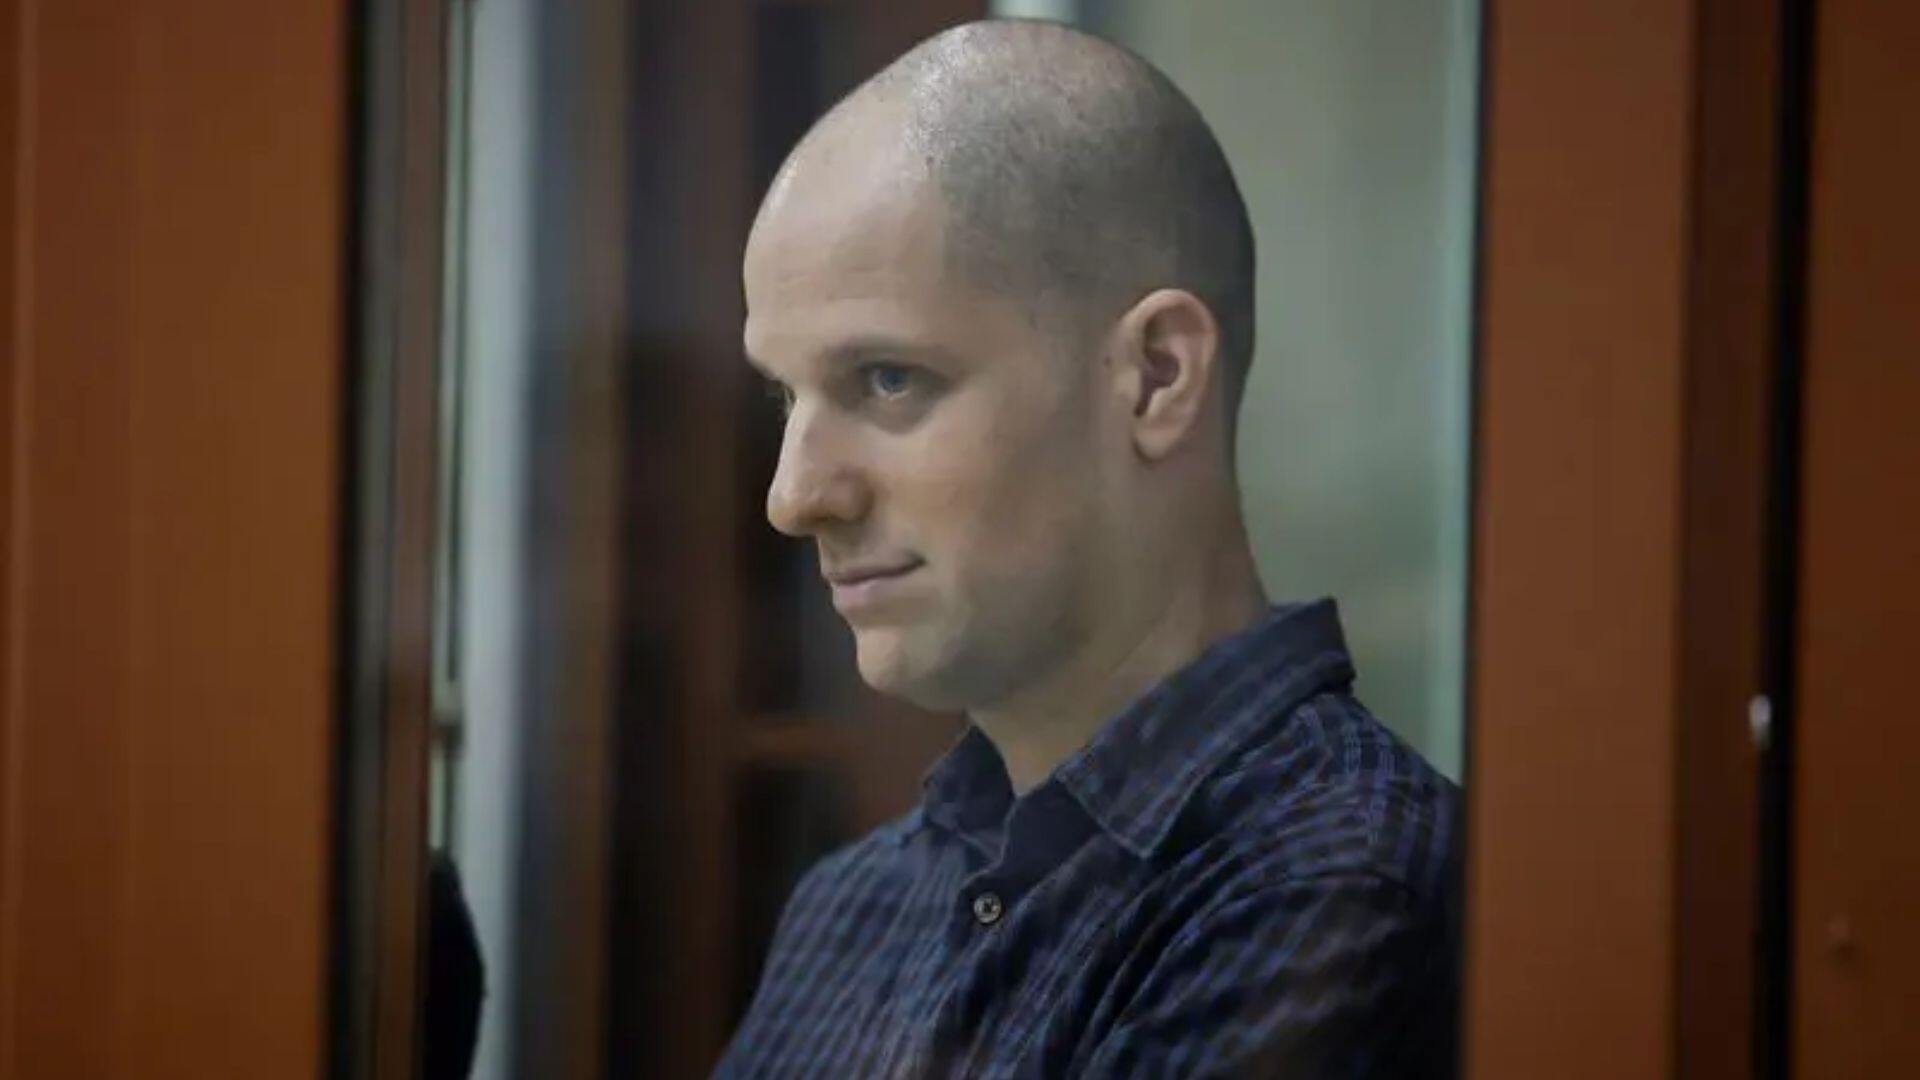 Espionage Trial Of US Reporter Evan Gershkovich Nears Conclusion In Russia